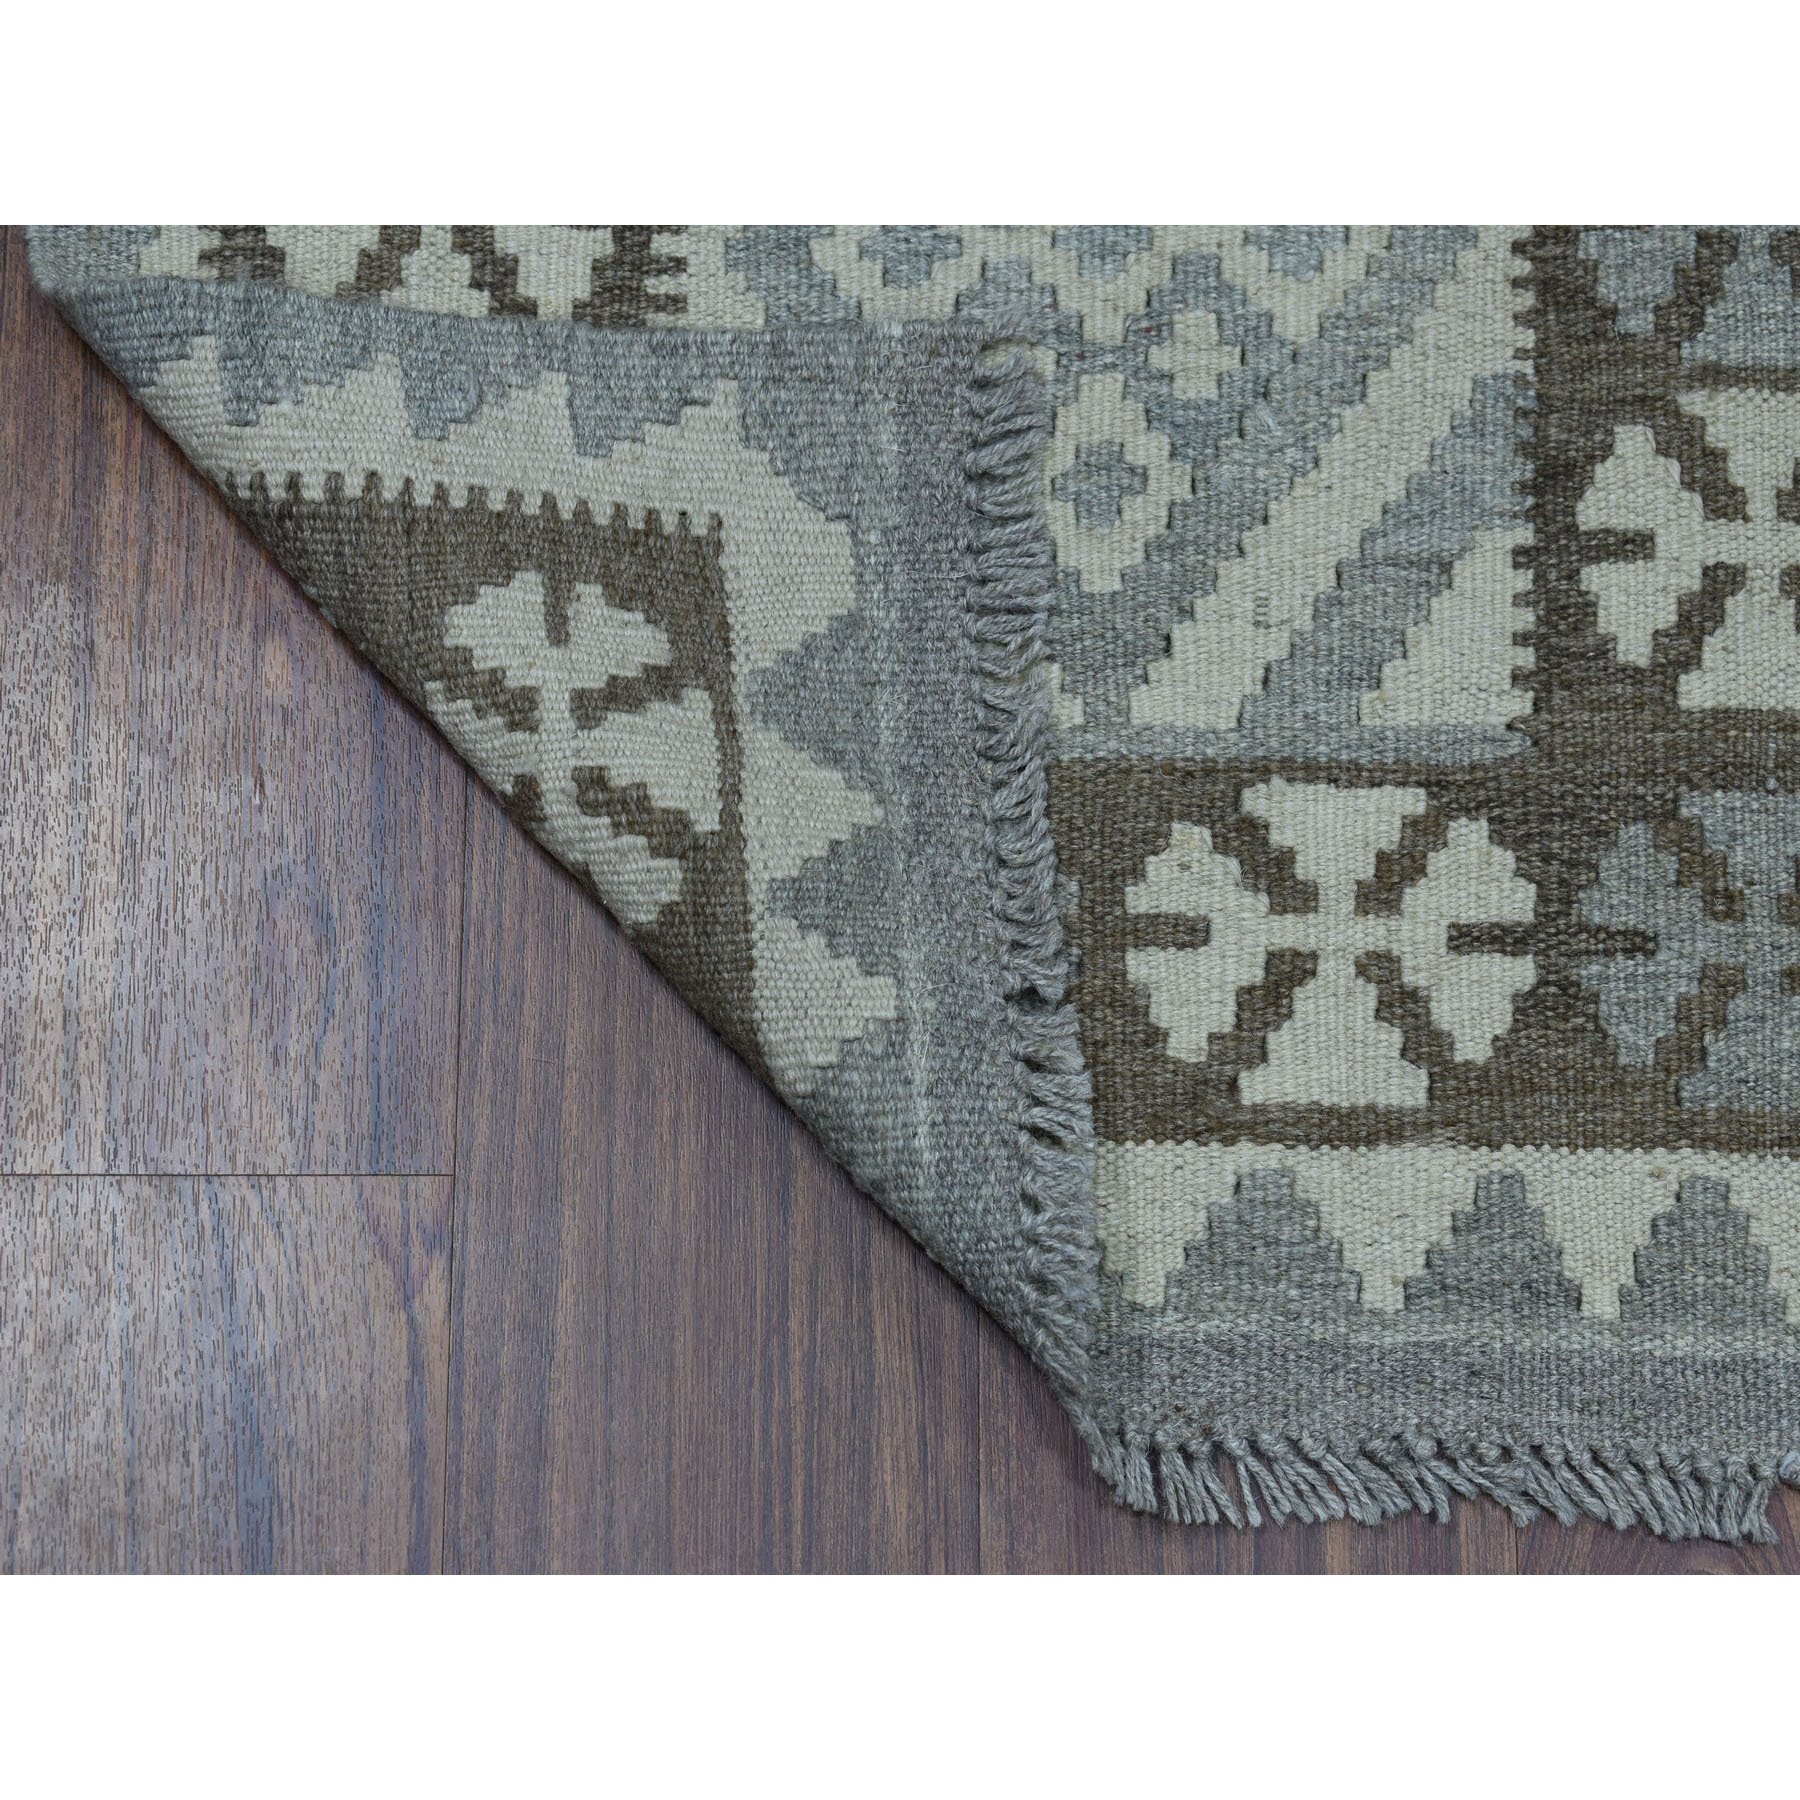 2-1 x3- Undyed Natural Wool Afghan Kilim Reversible Hand Woven Oriental Rug 